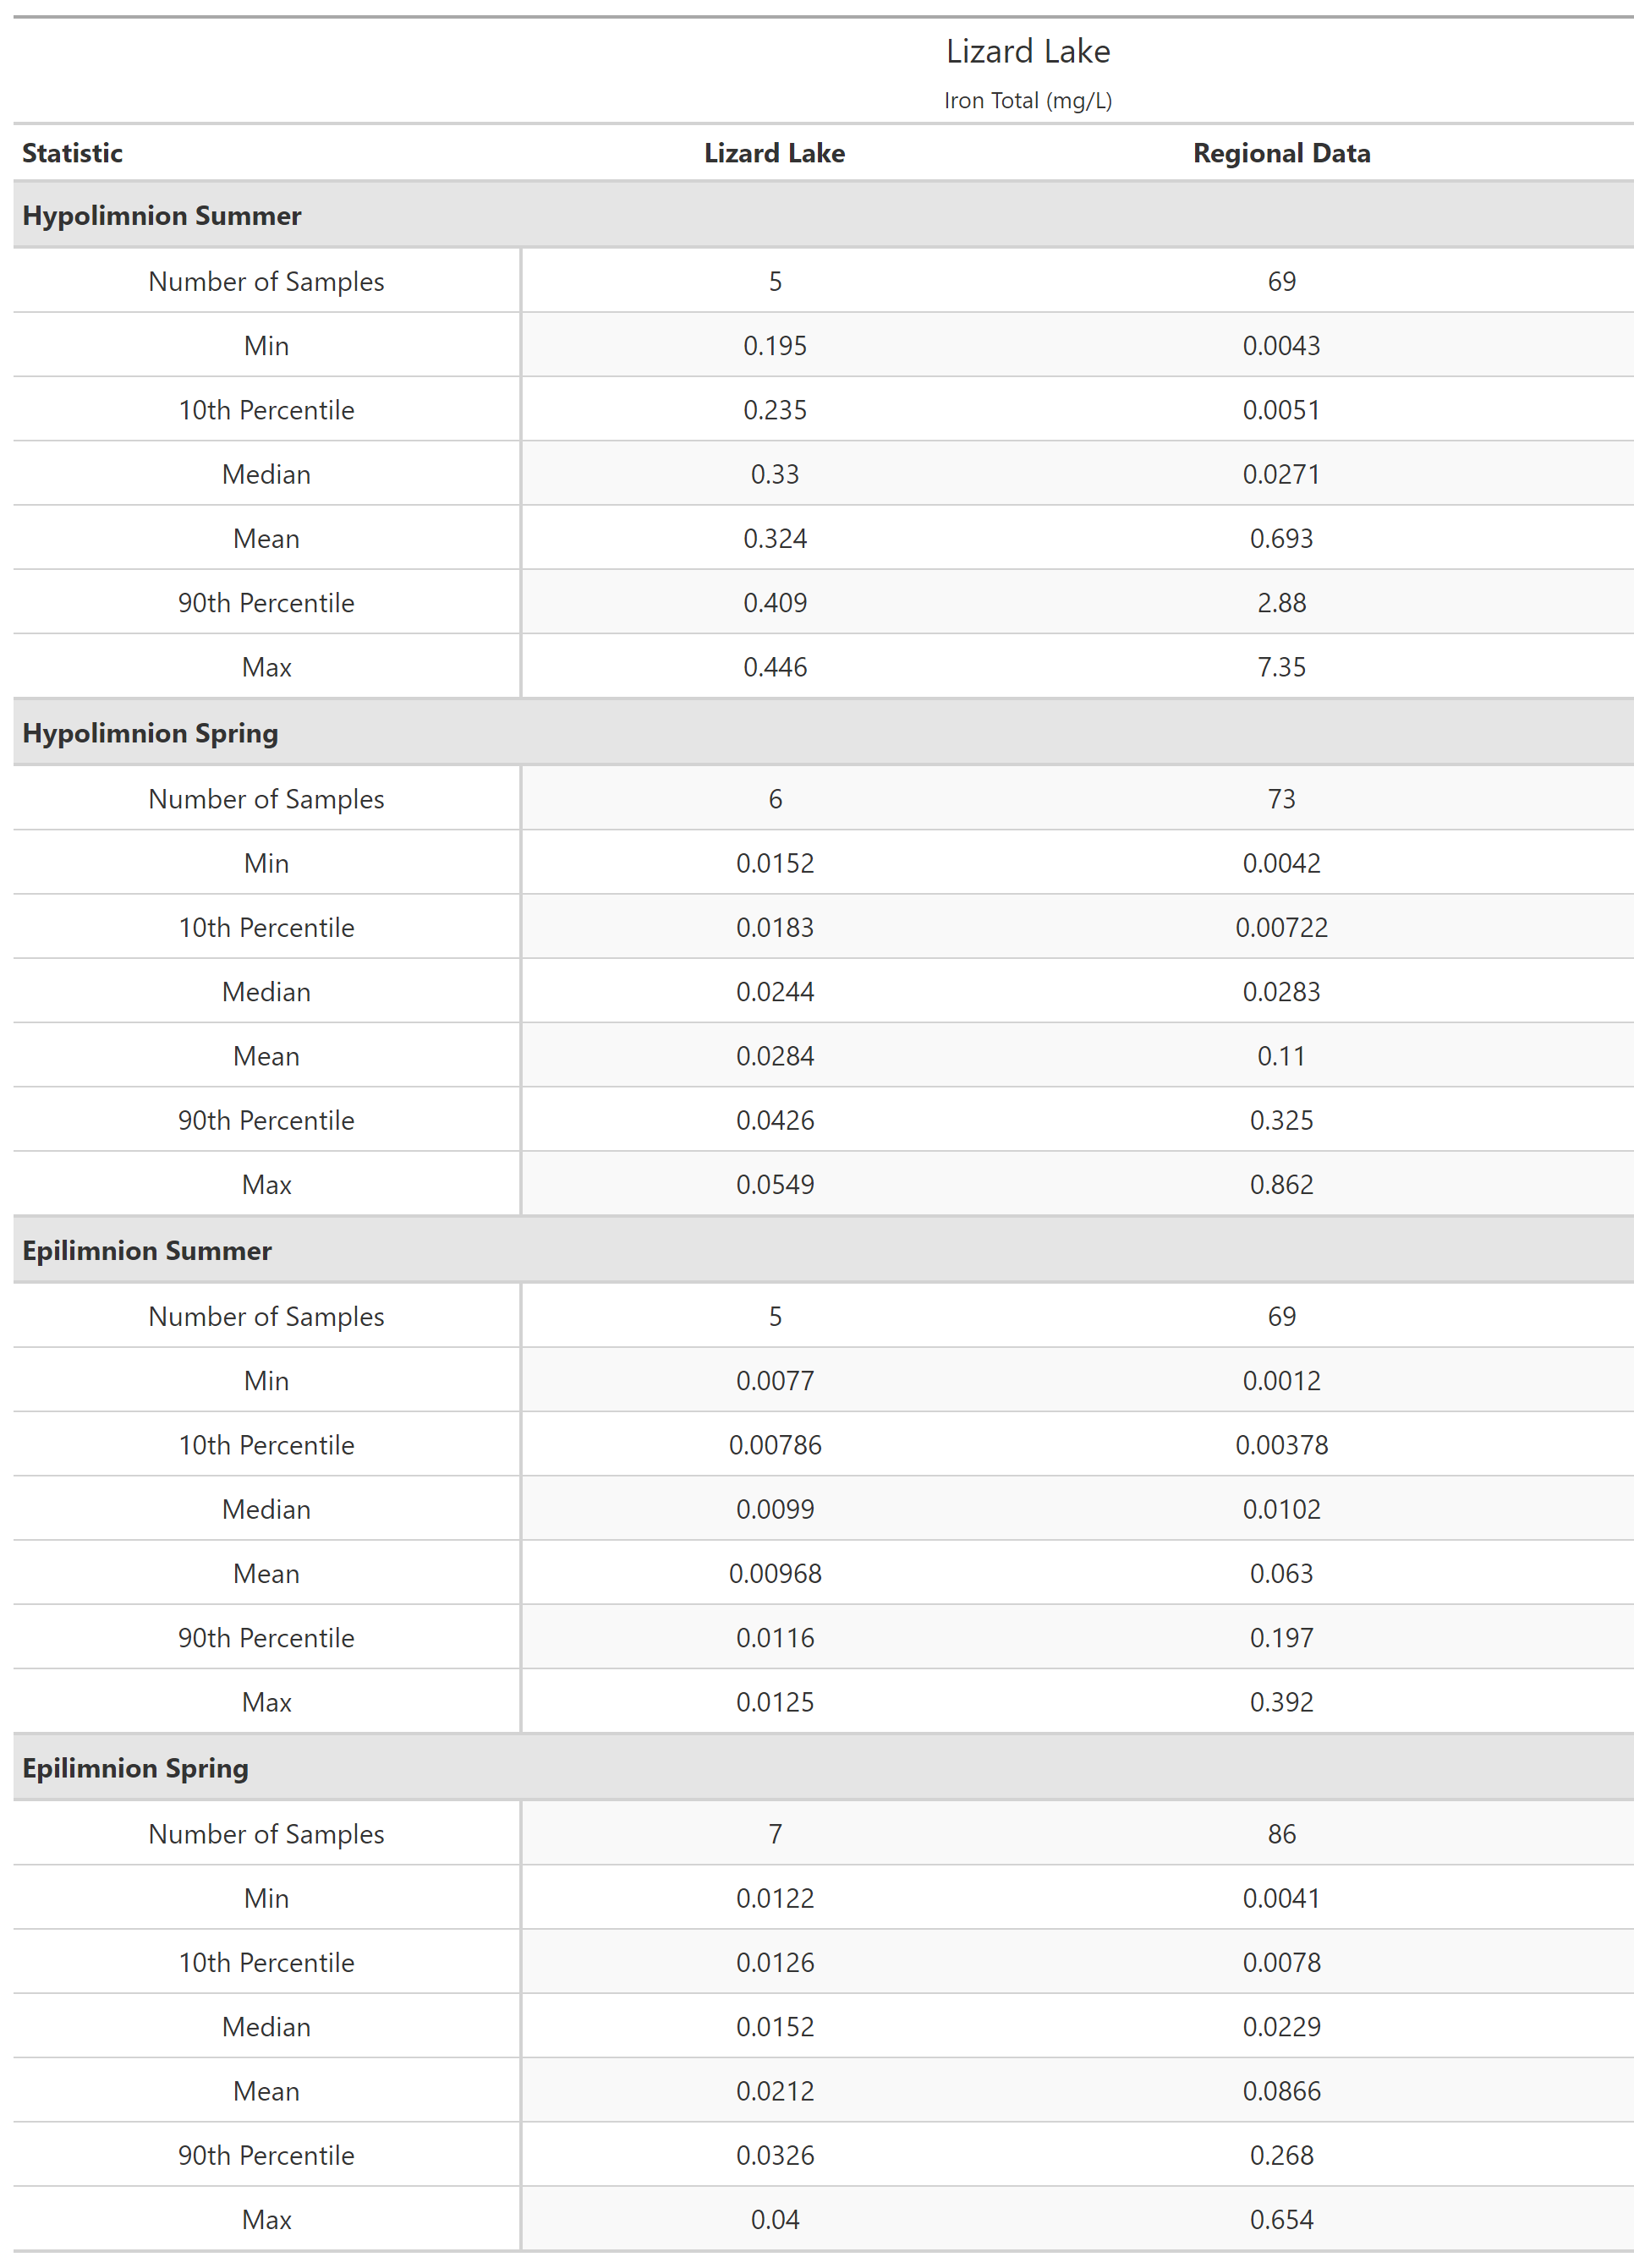 A table of summary statistics for Iron Total with comparison to regional data